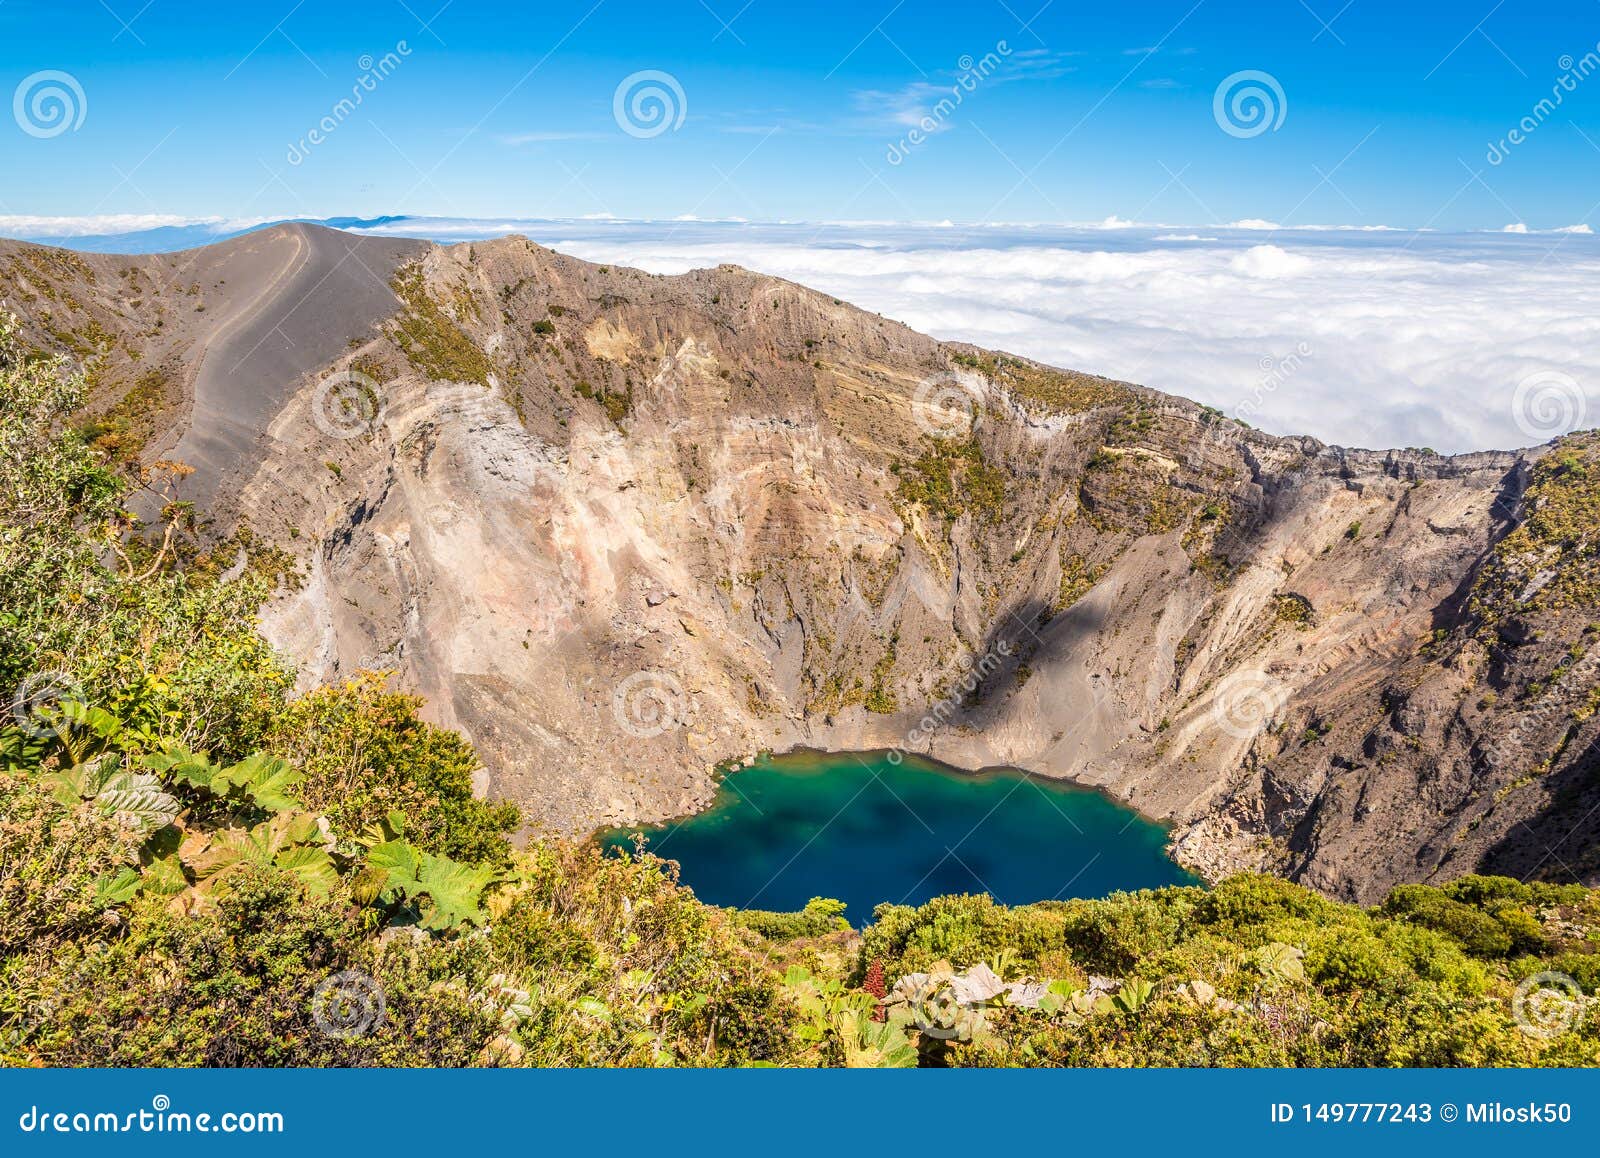 view to the crater of irazu volcano at irazu volcano national park in costa rica